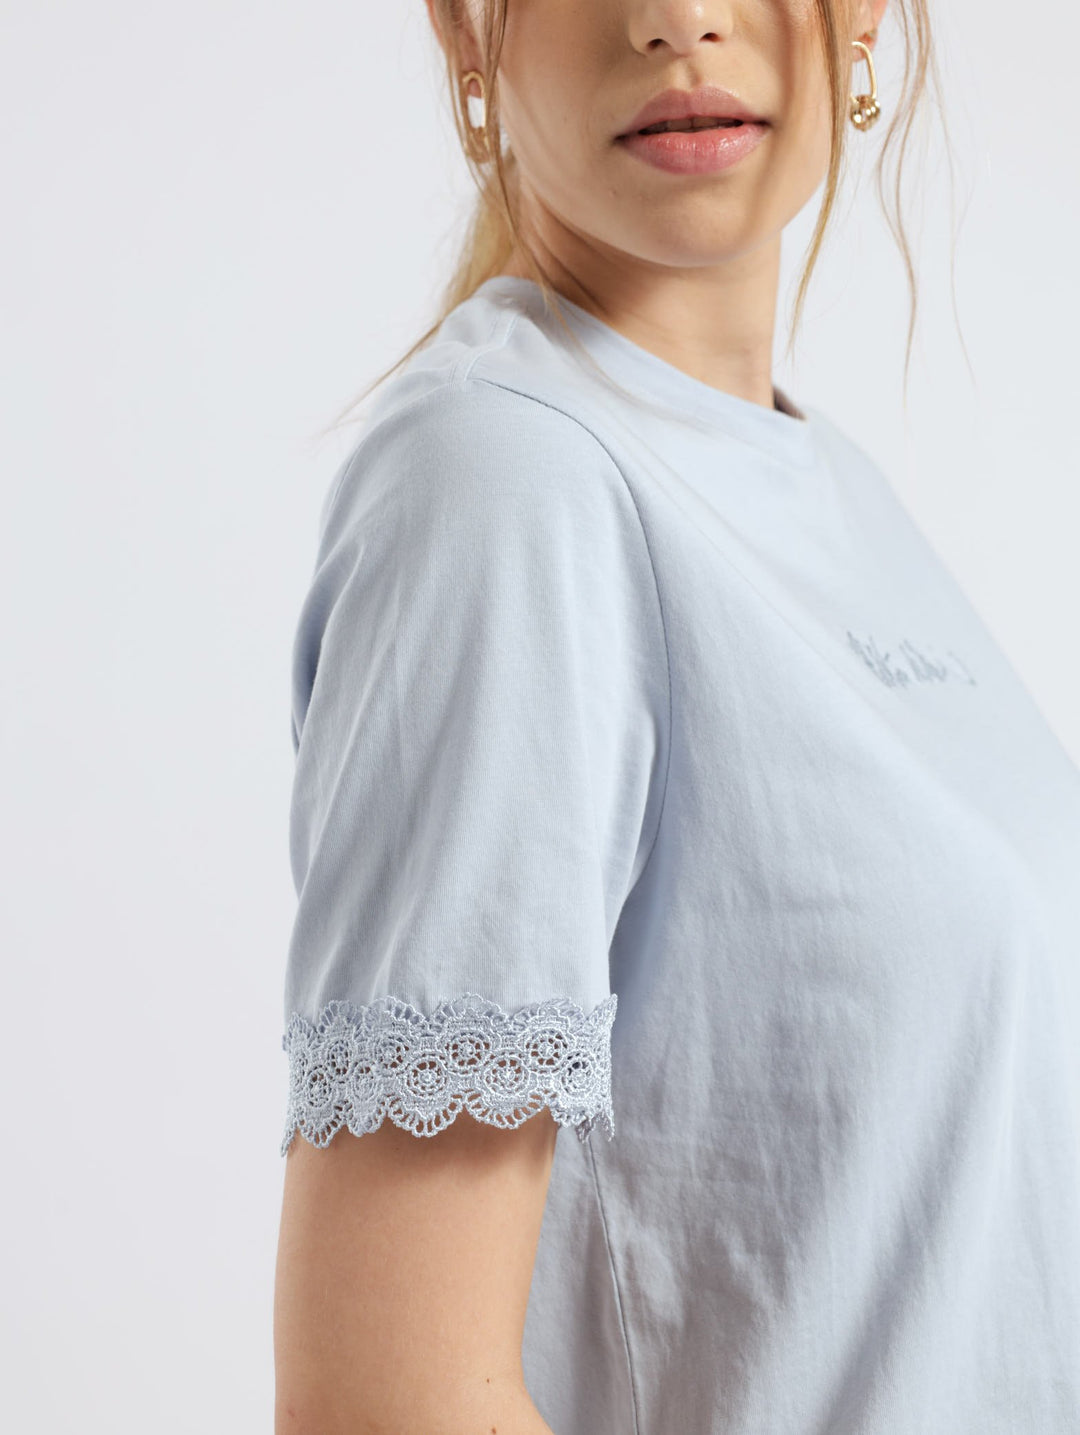 Relaxed Lace Trim Tee - Light Blue